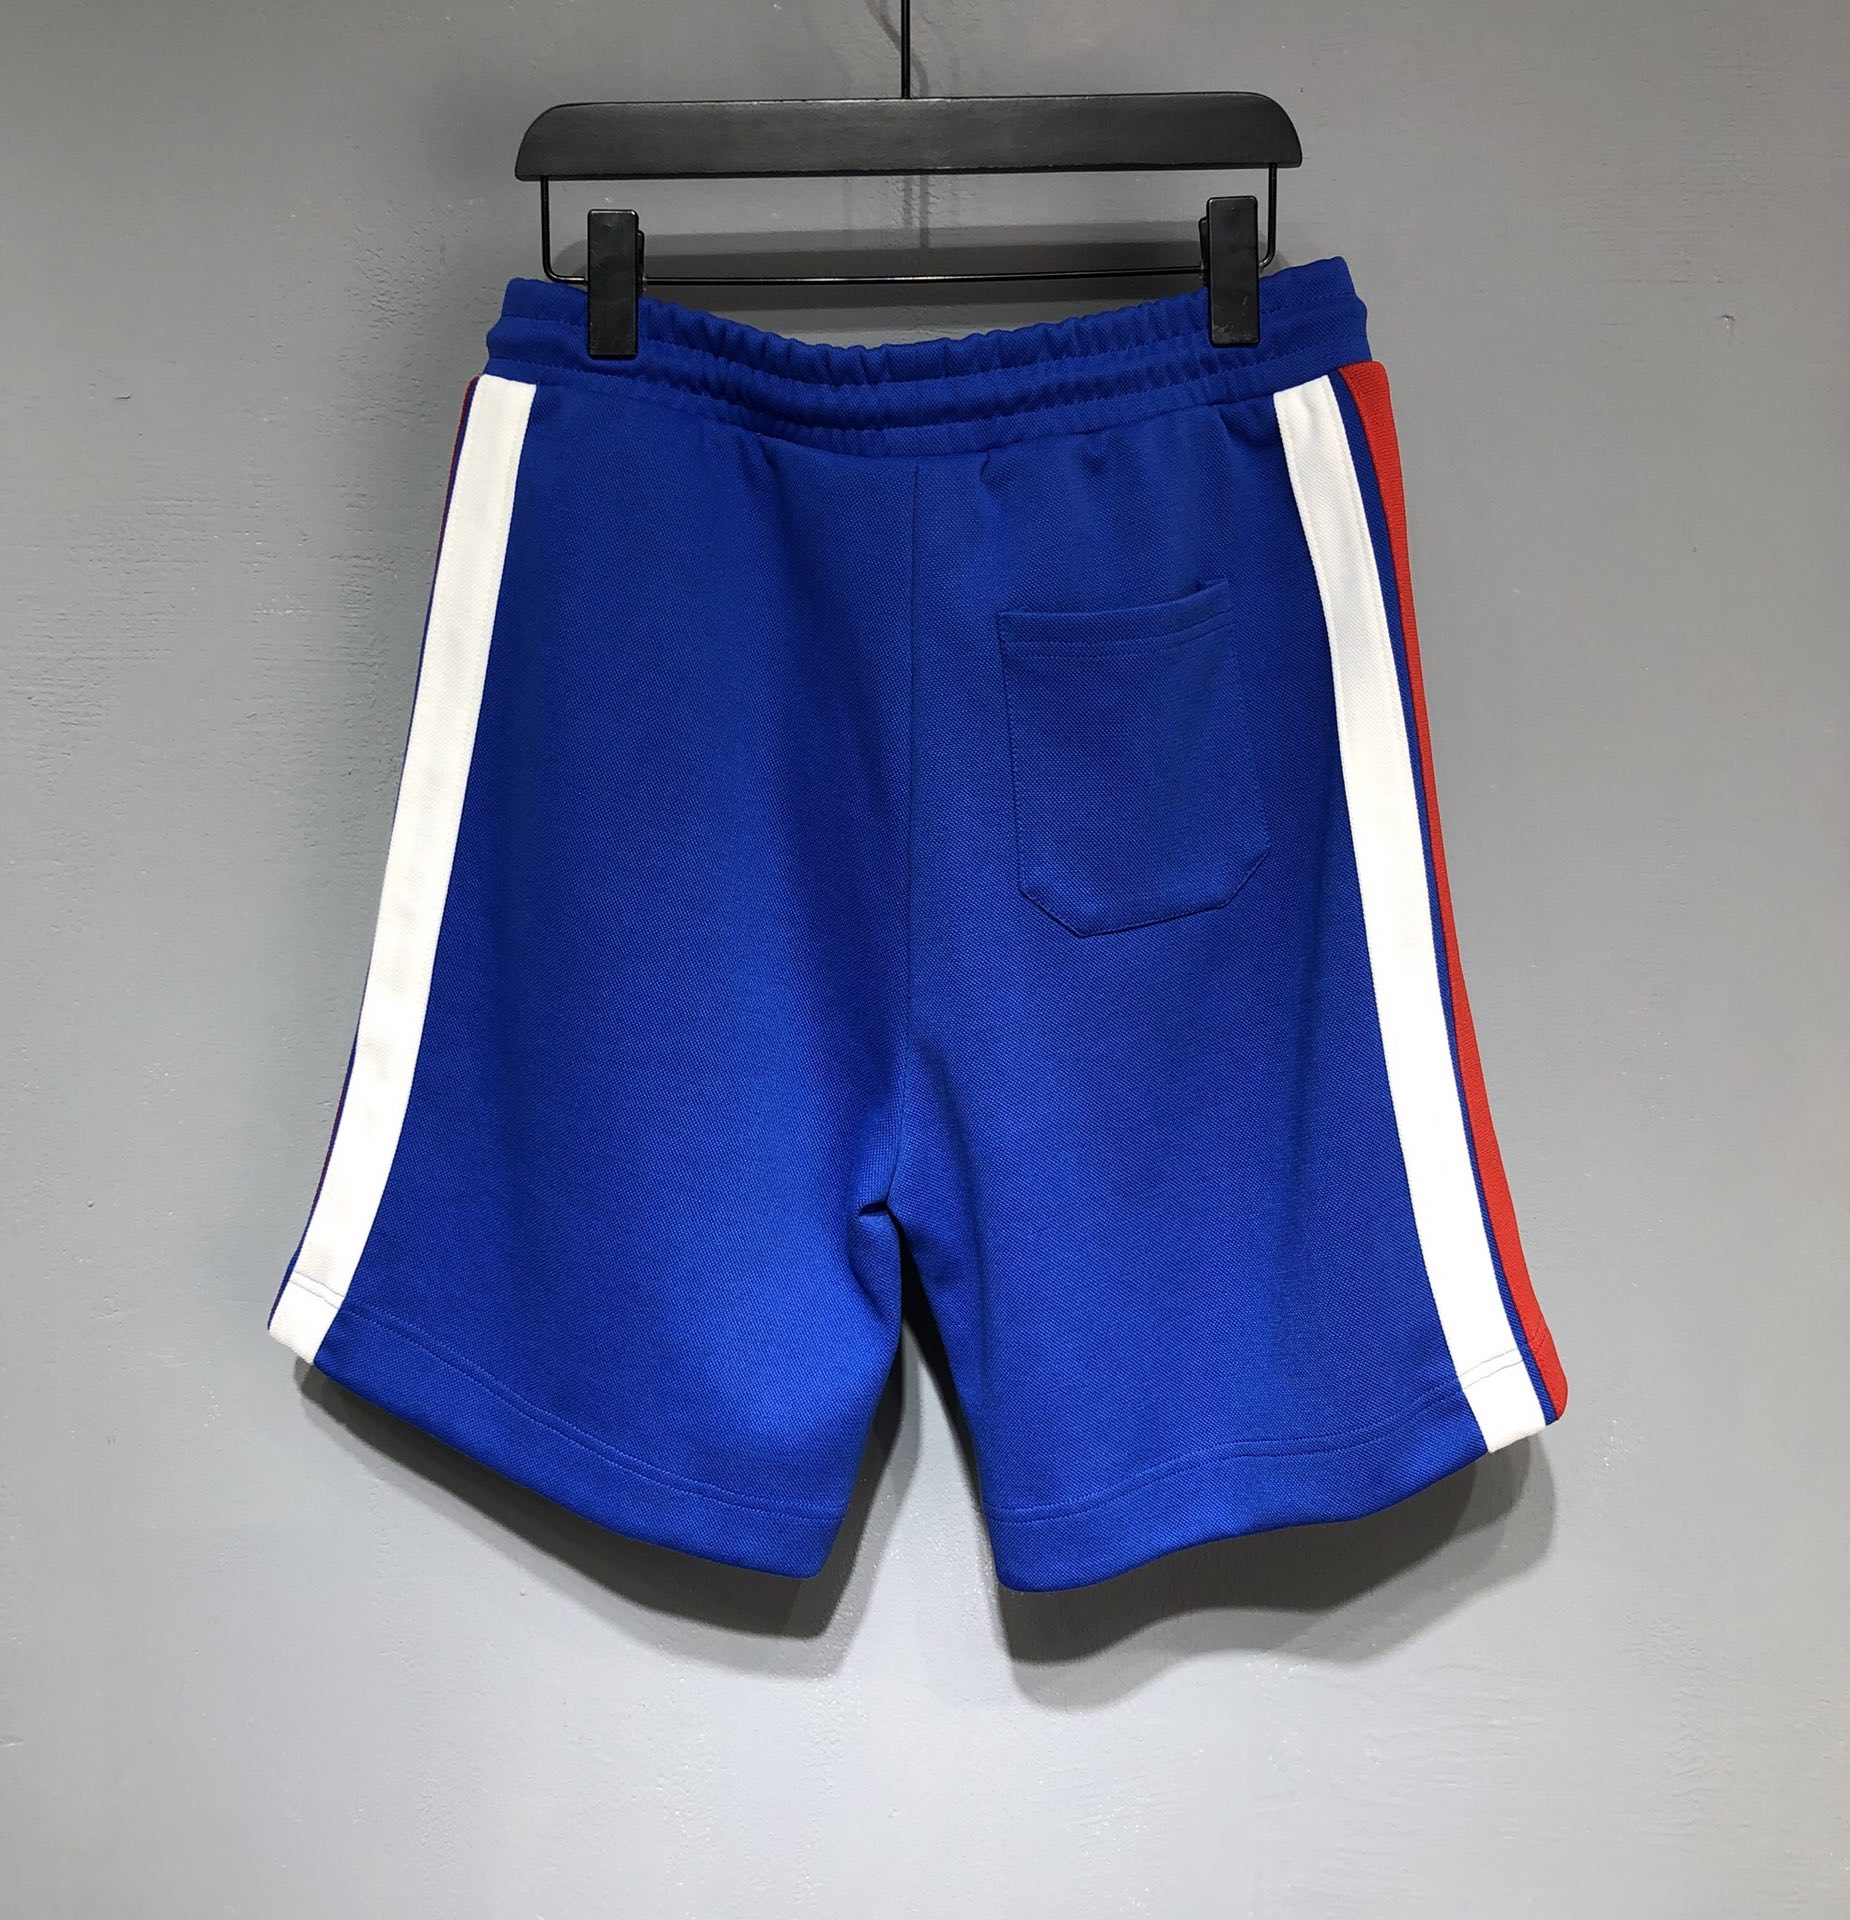 GUCCI 2022SS New Arrival Shorts